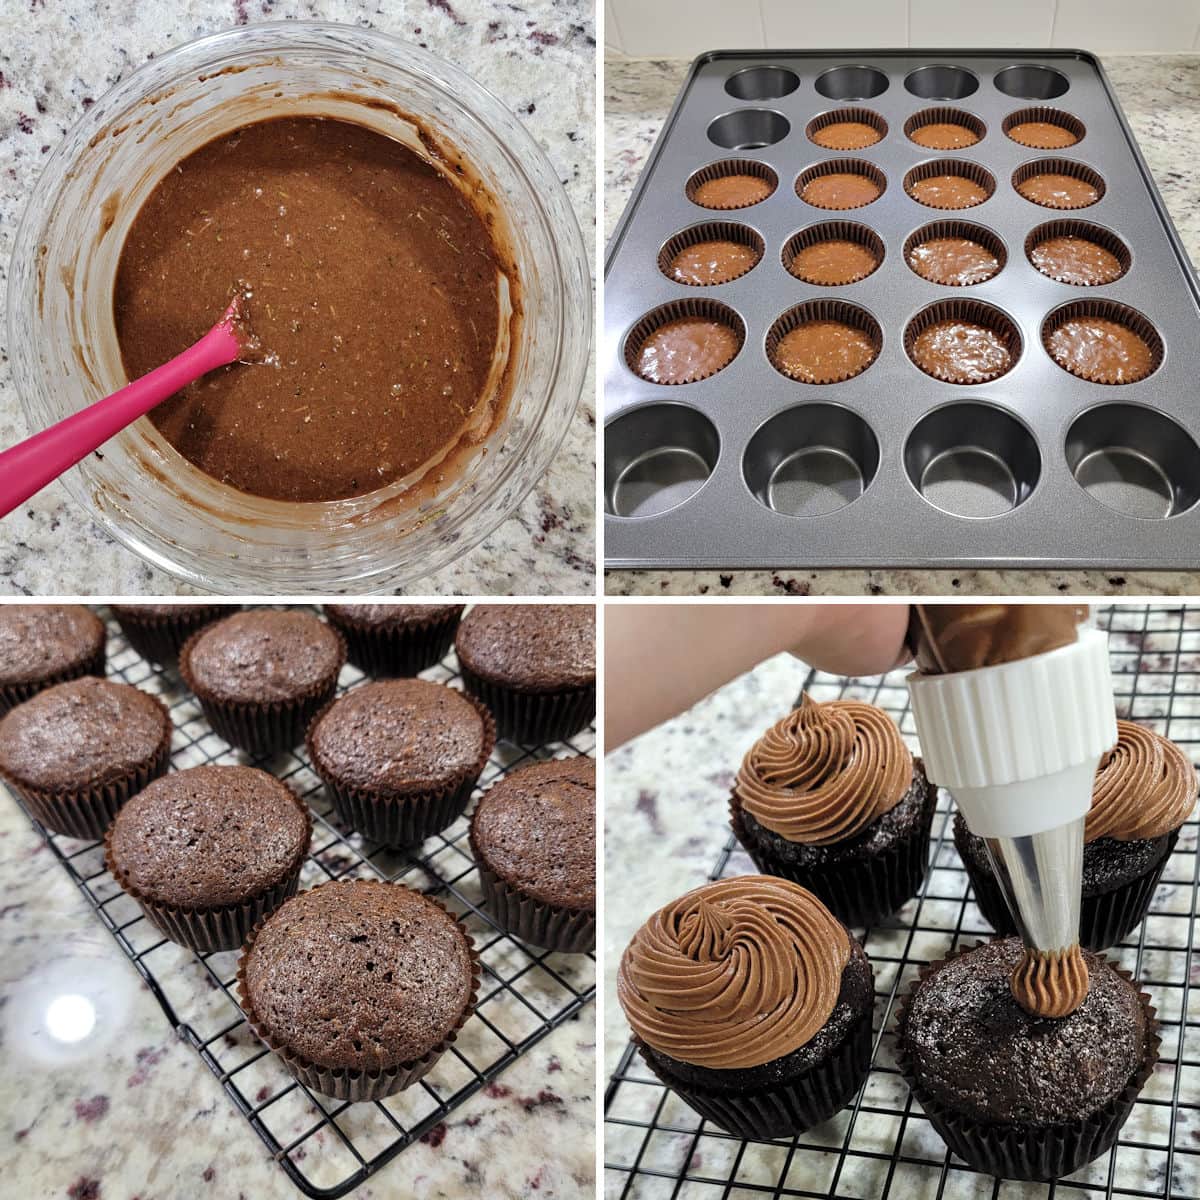 Making chocolate zucchini cupcakes and frosting.